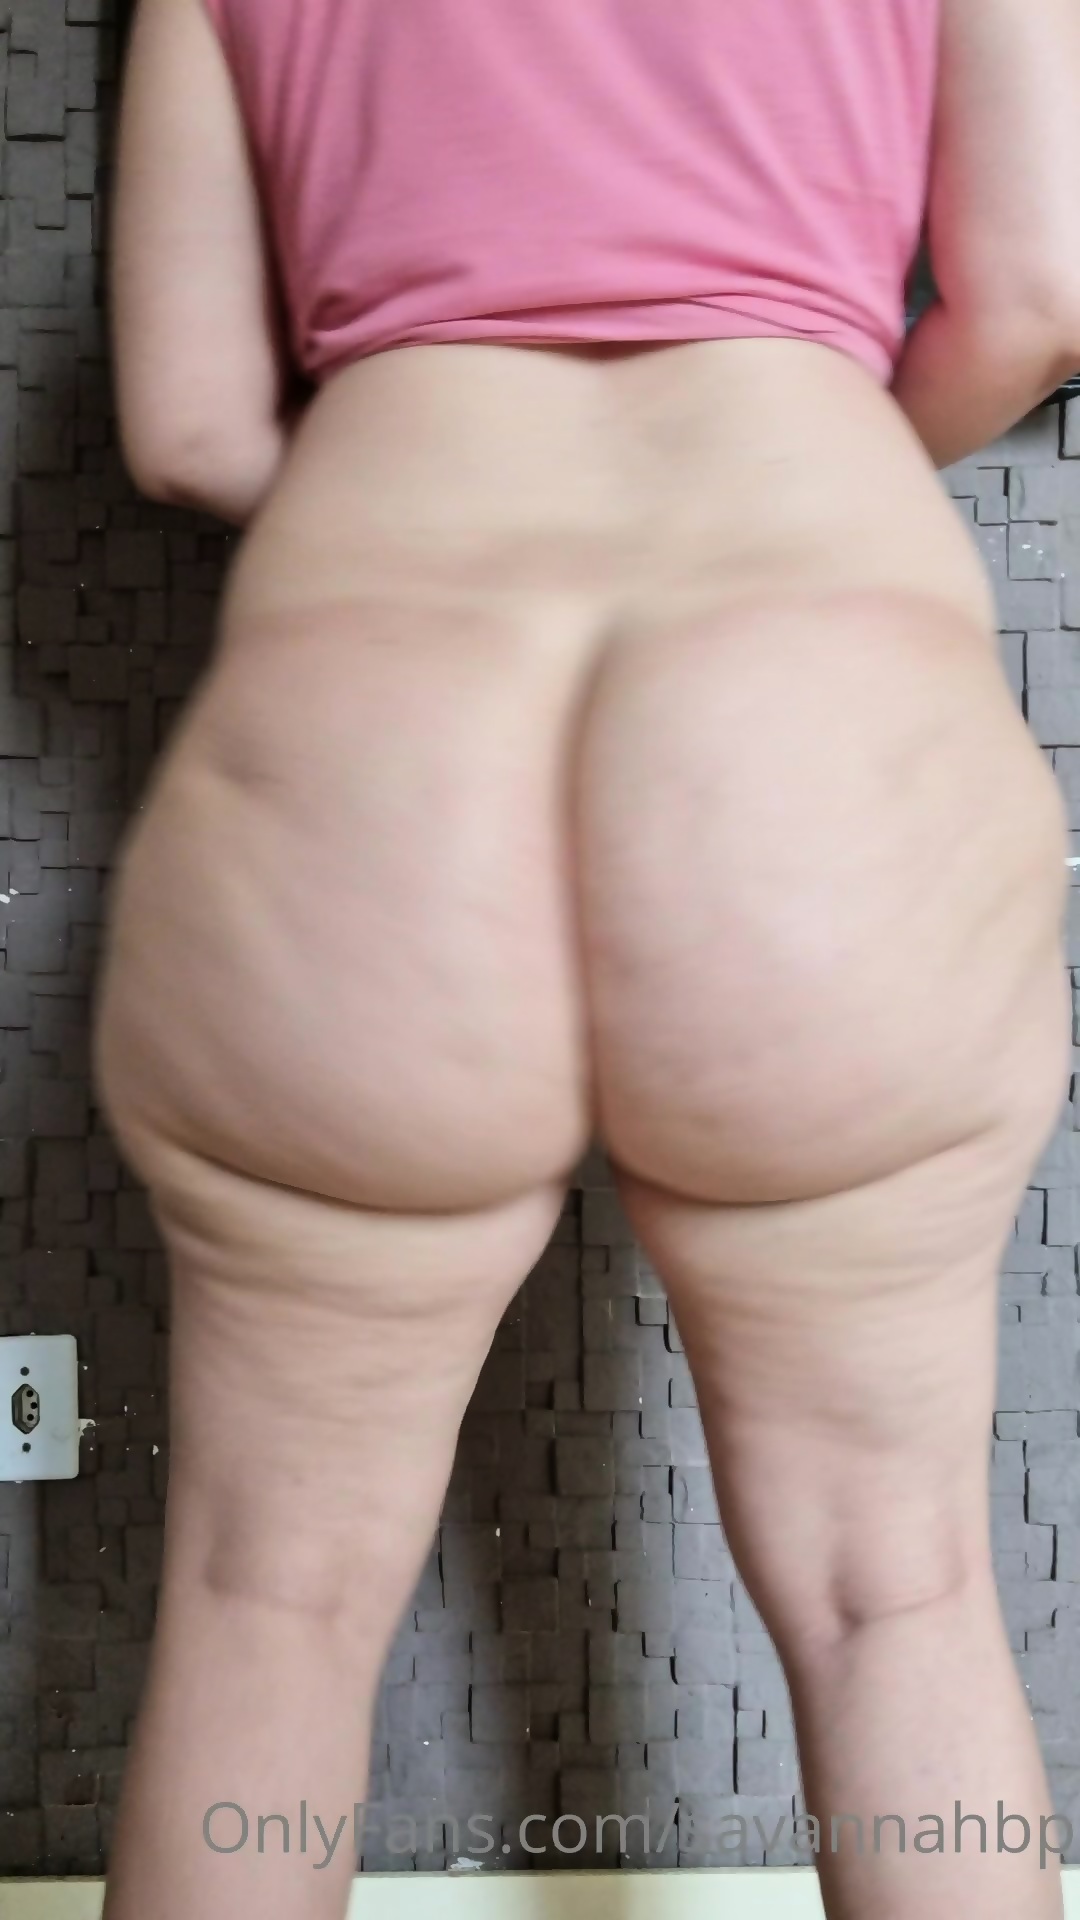 PAWG Jiggly Cellulite Saggy Tits picture